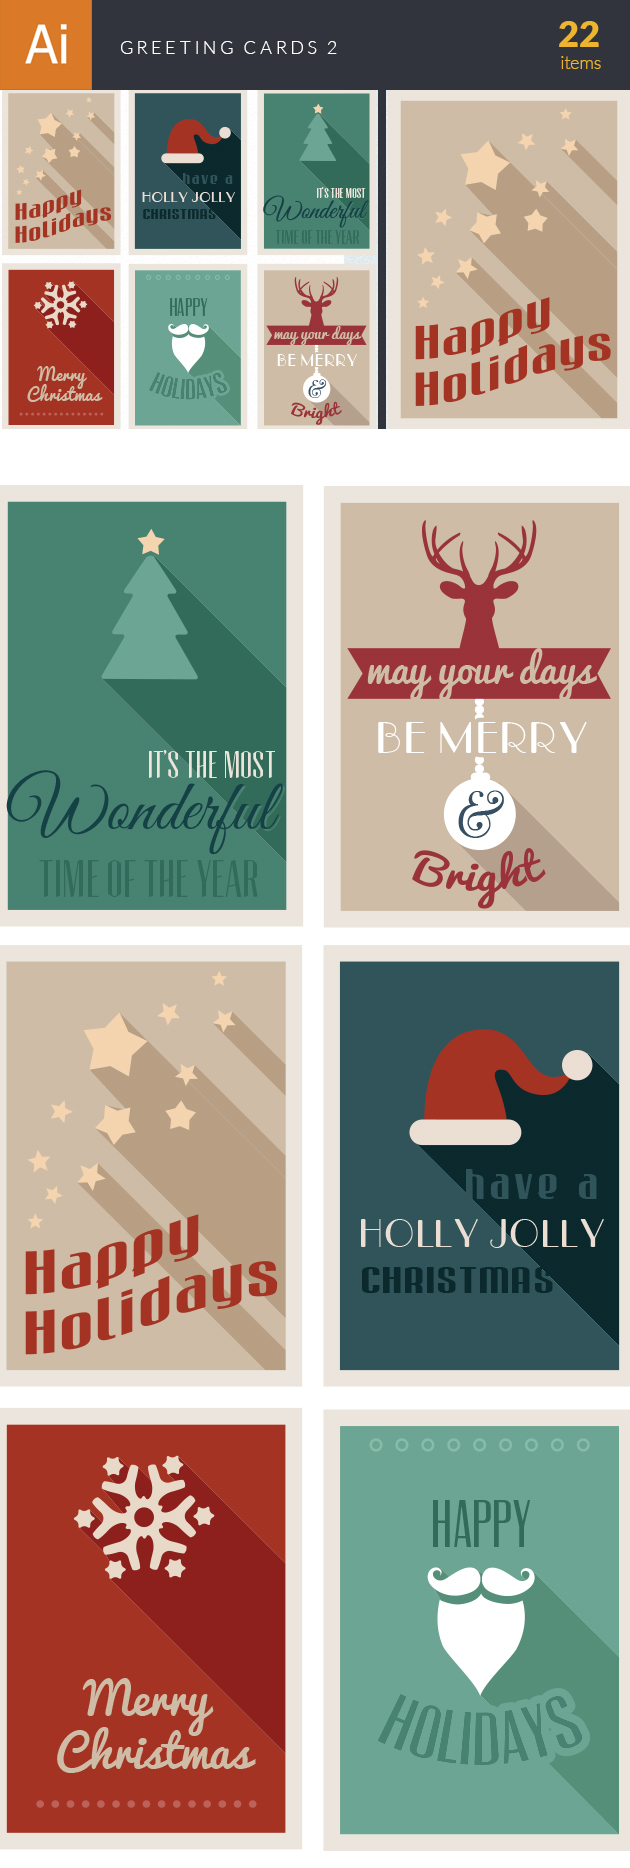 Greeting Cards Vector Set 2 2